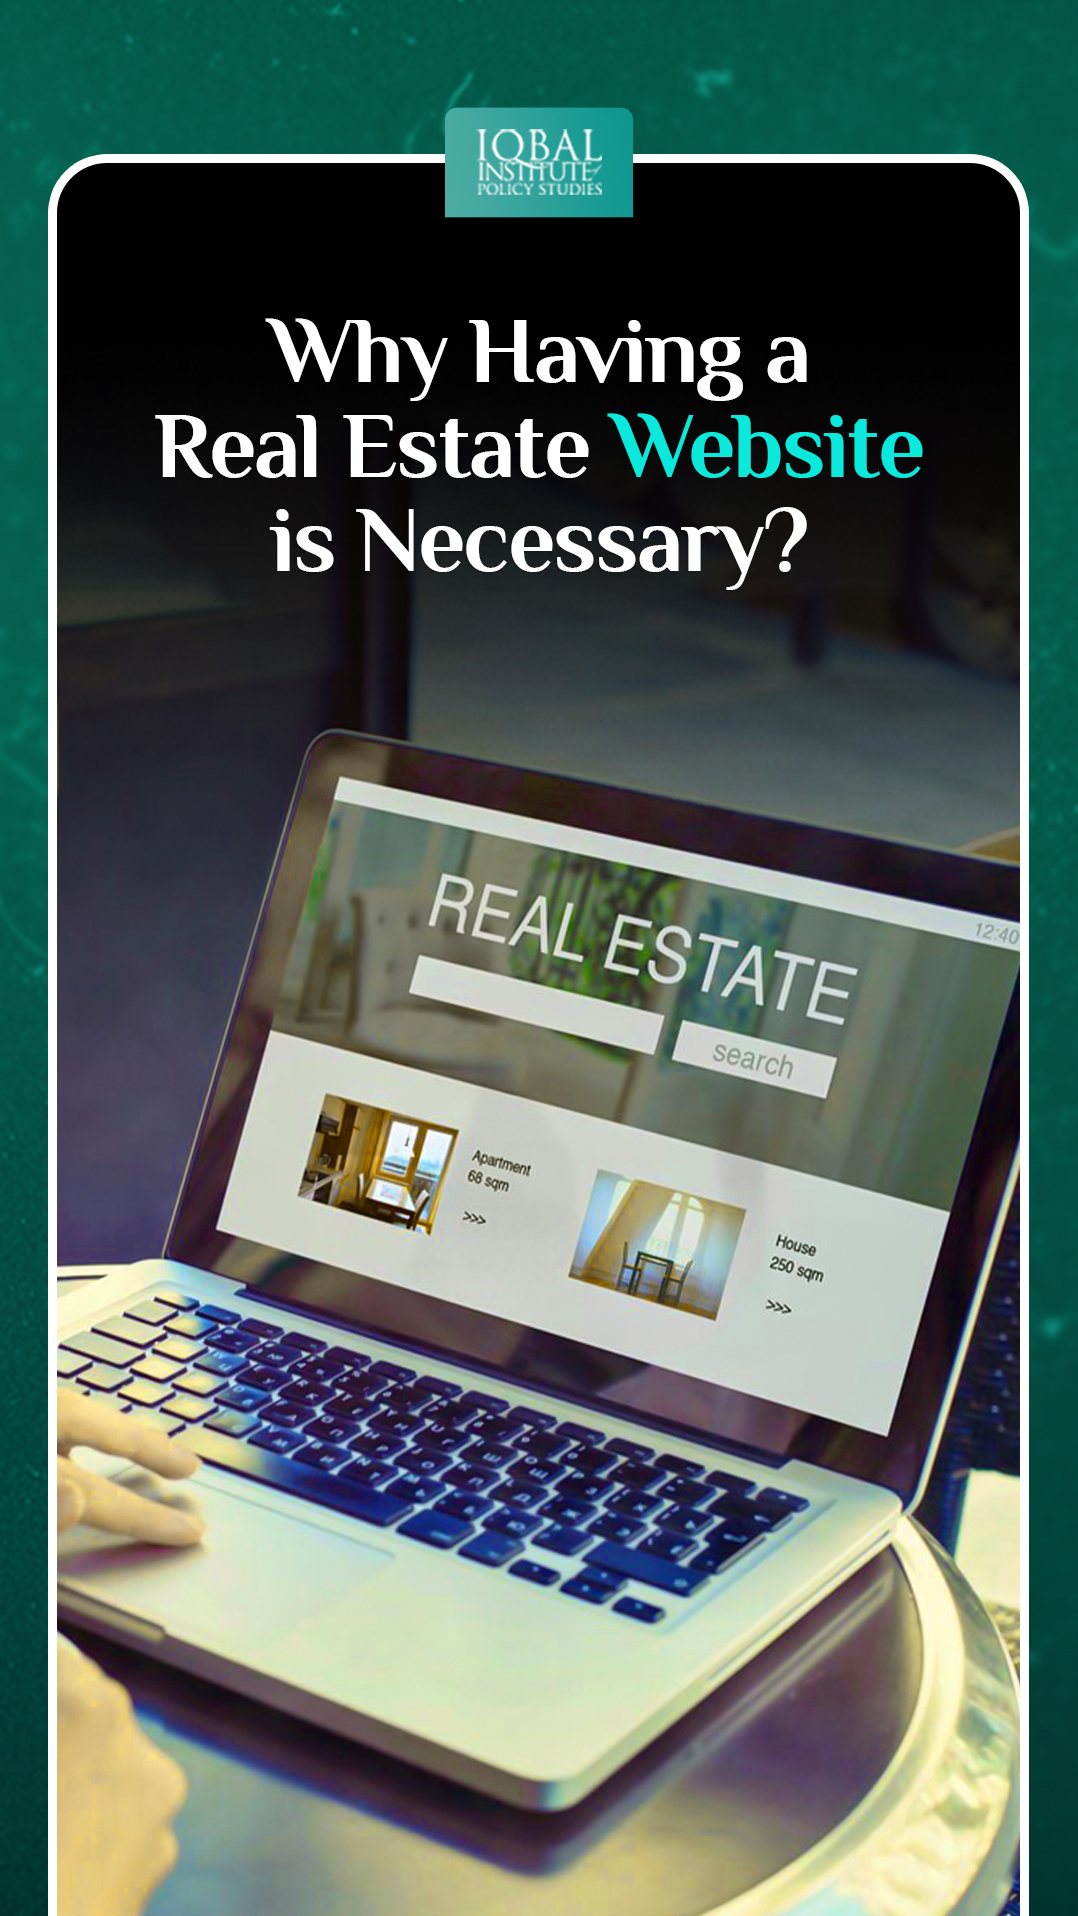 Why Having a Real Estate Website is Necessary?